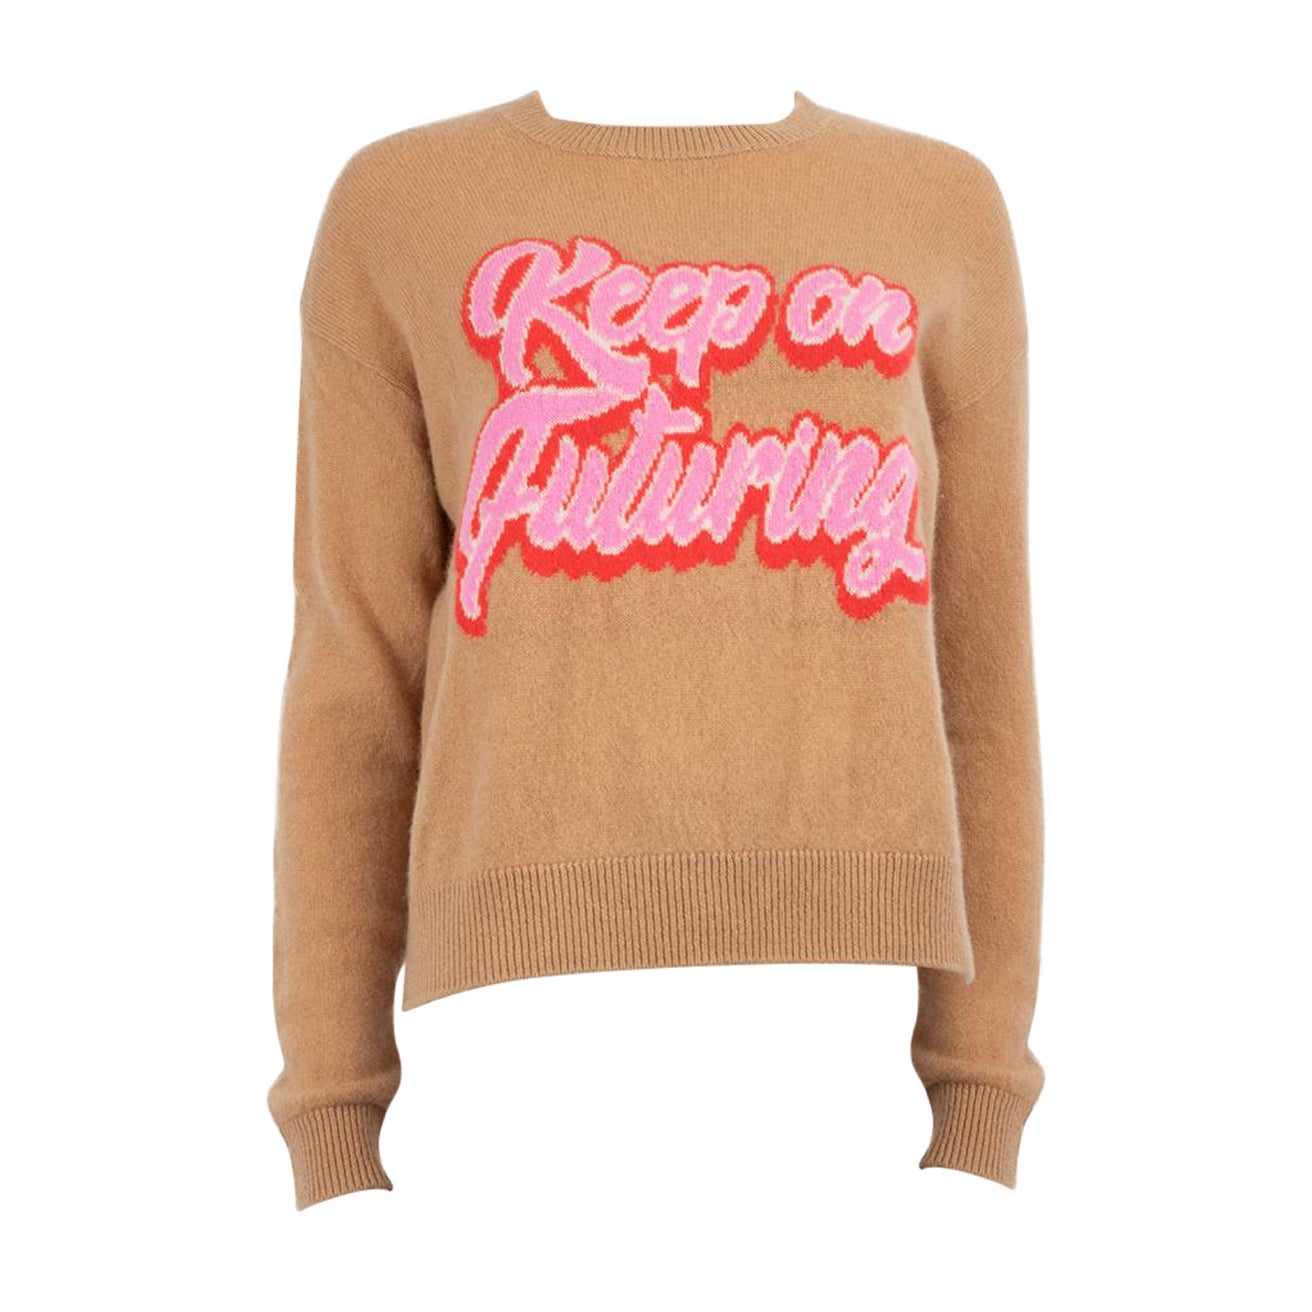 FROM FUTURE Brown Cashmere Knit Graphic Jumper Size S For Sale